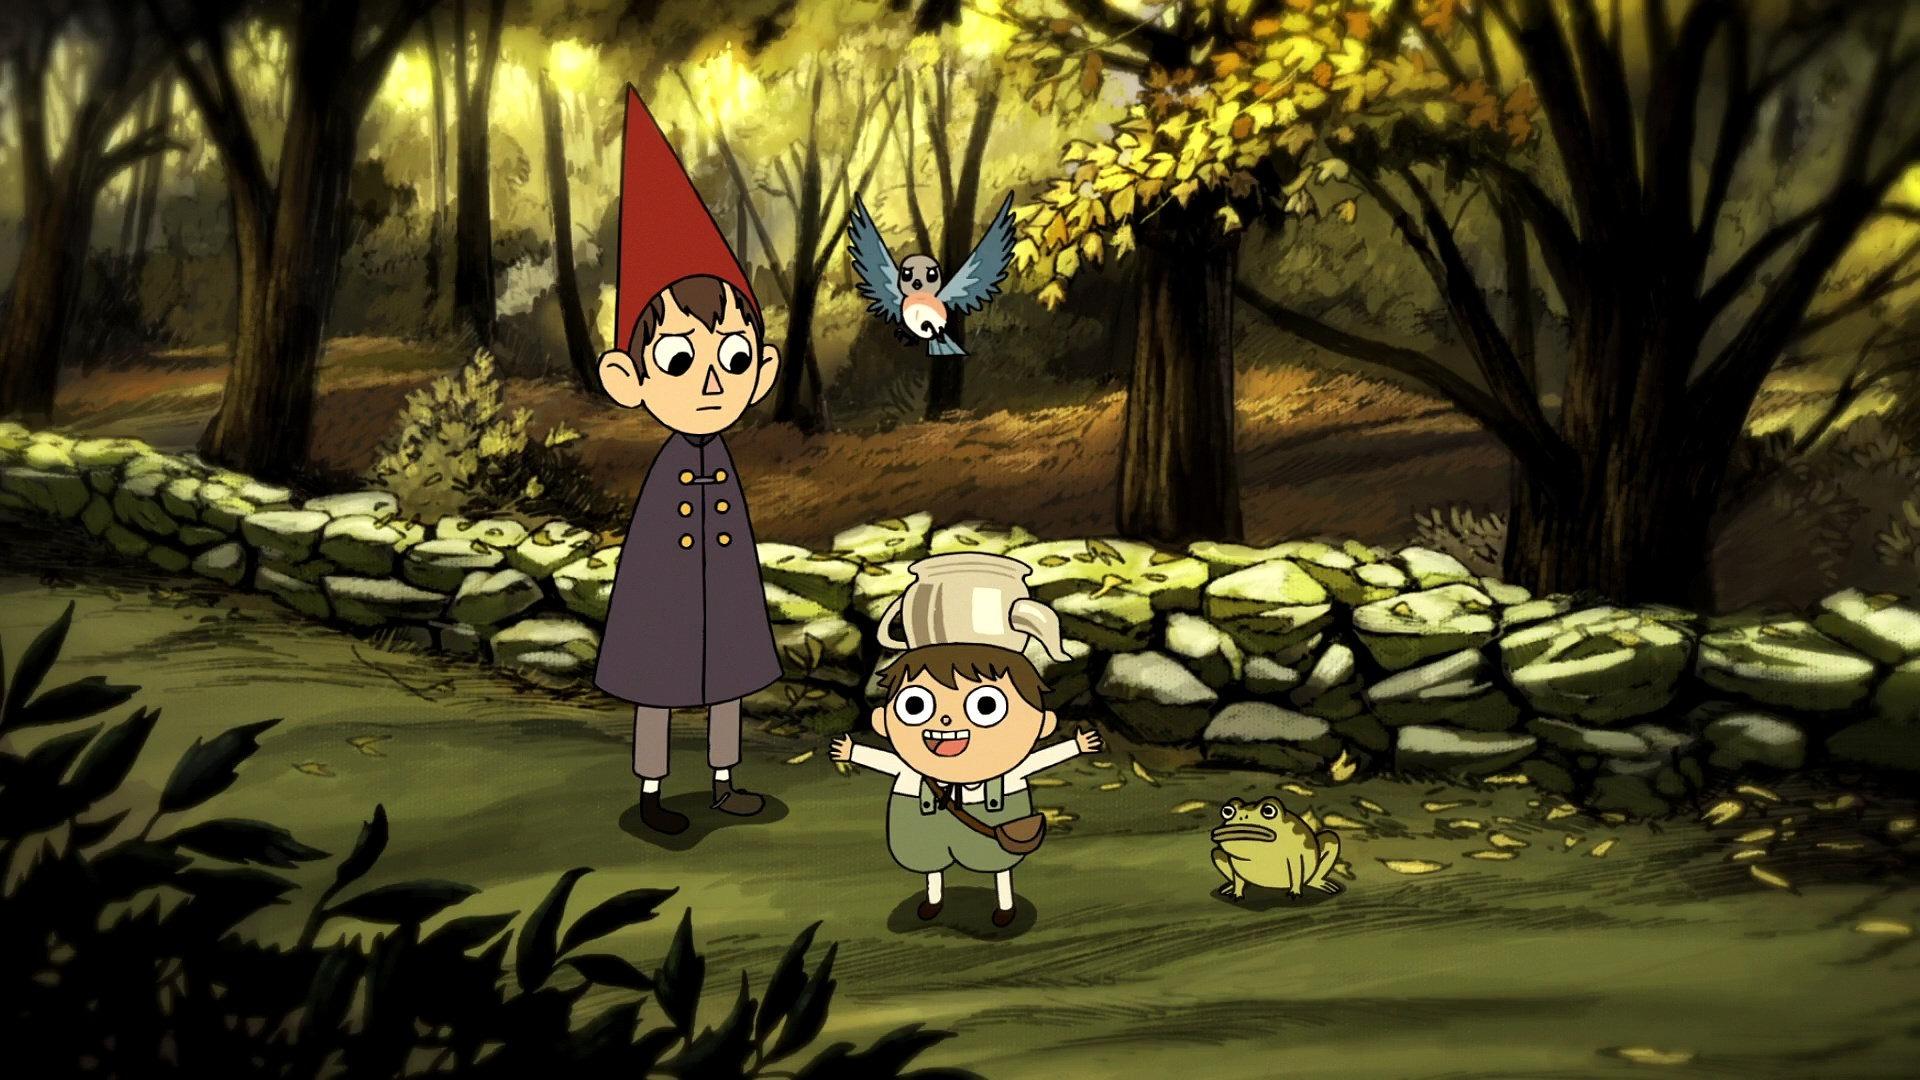 Over The Garden Wall Wallpaper, image collections of wallpaper